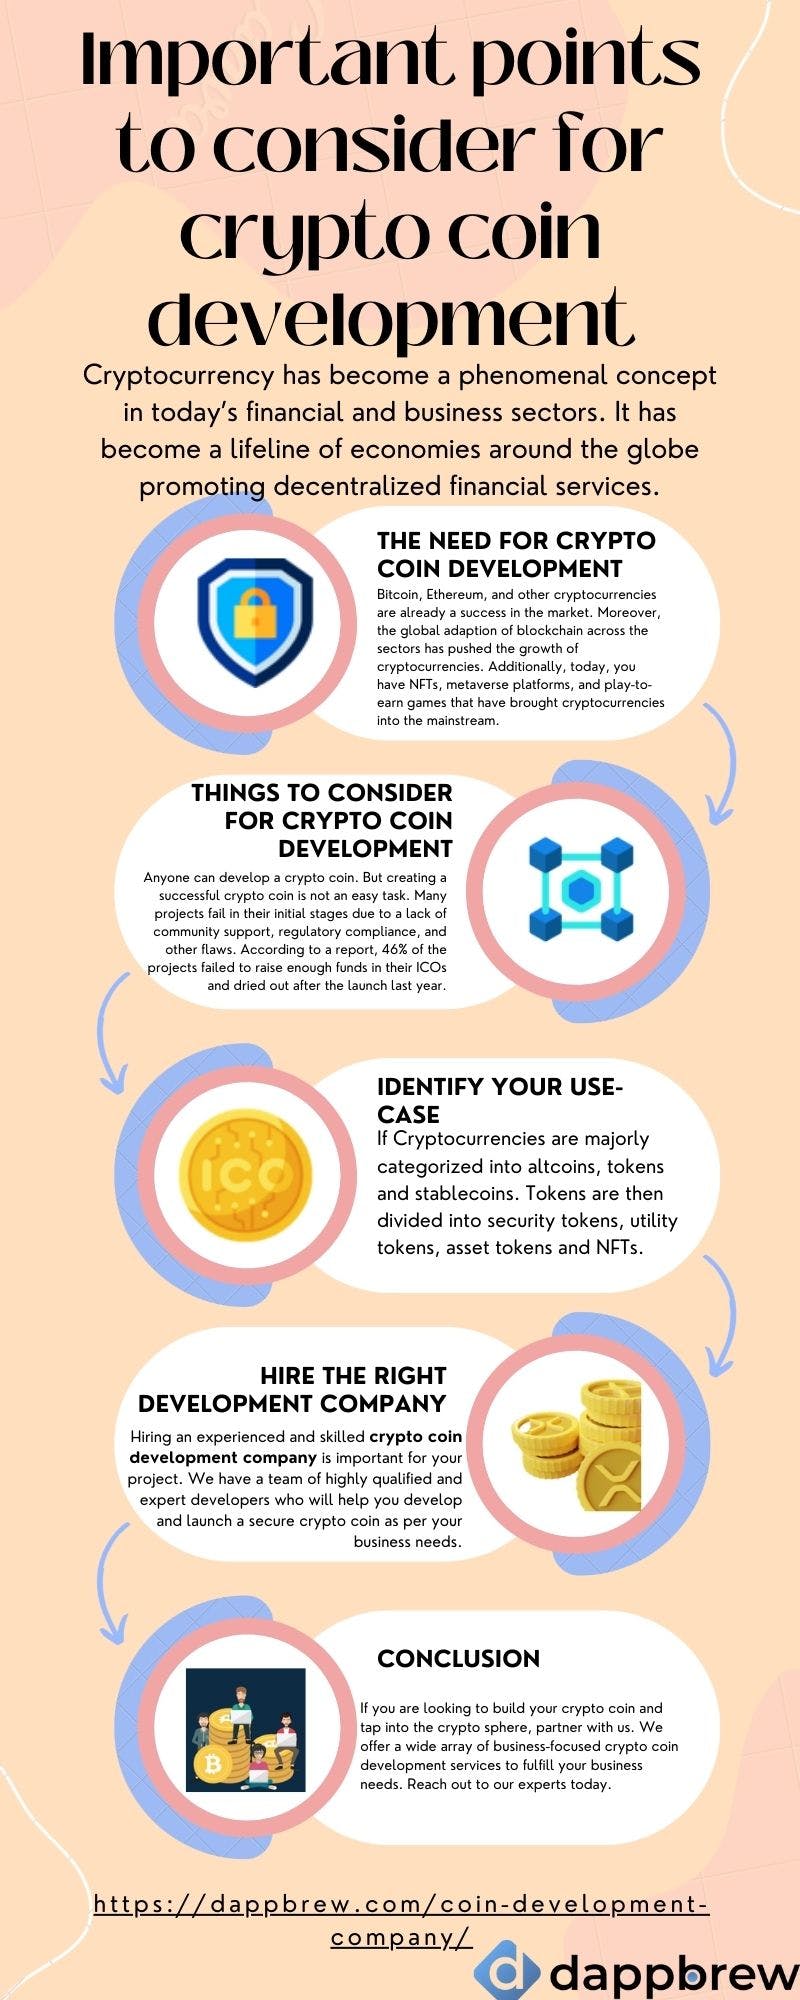 Important points to consider for crypto coin development (1).jpg